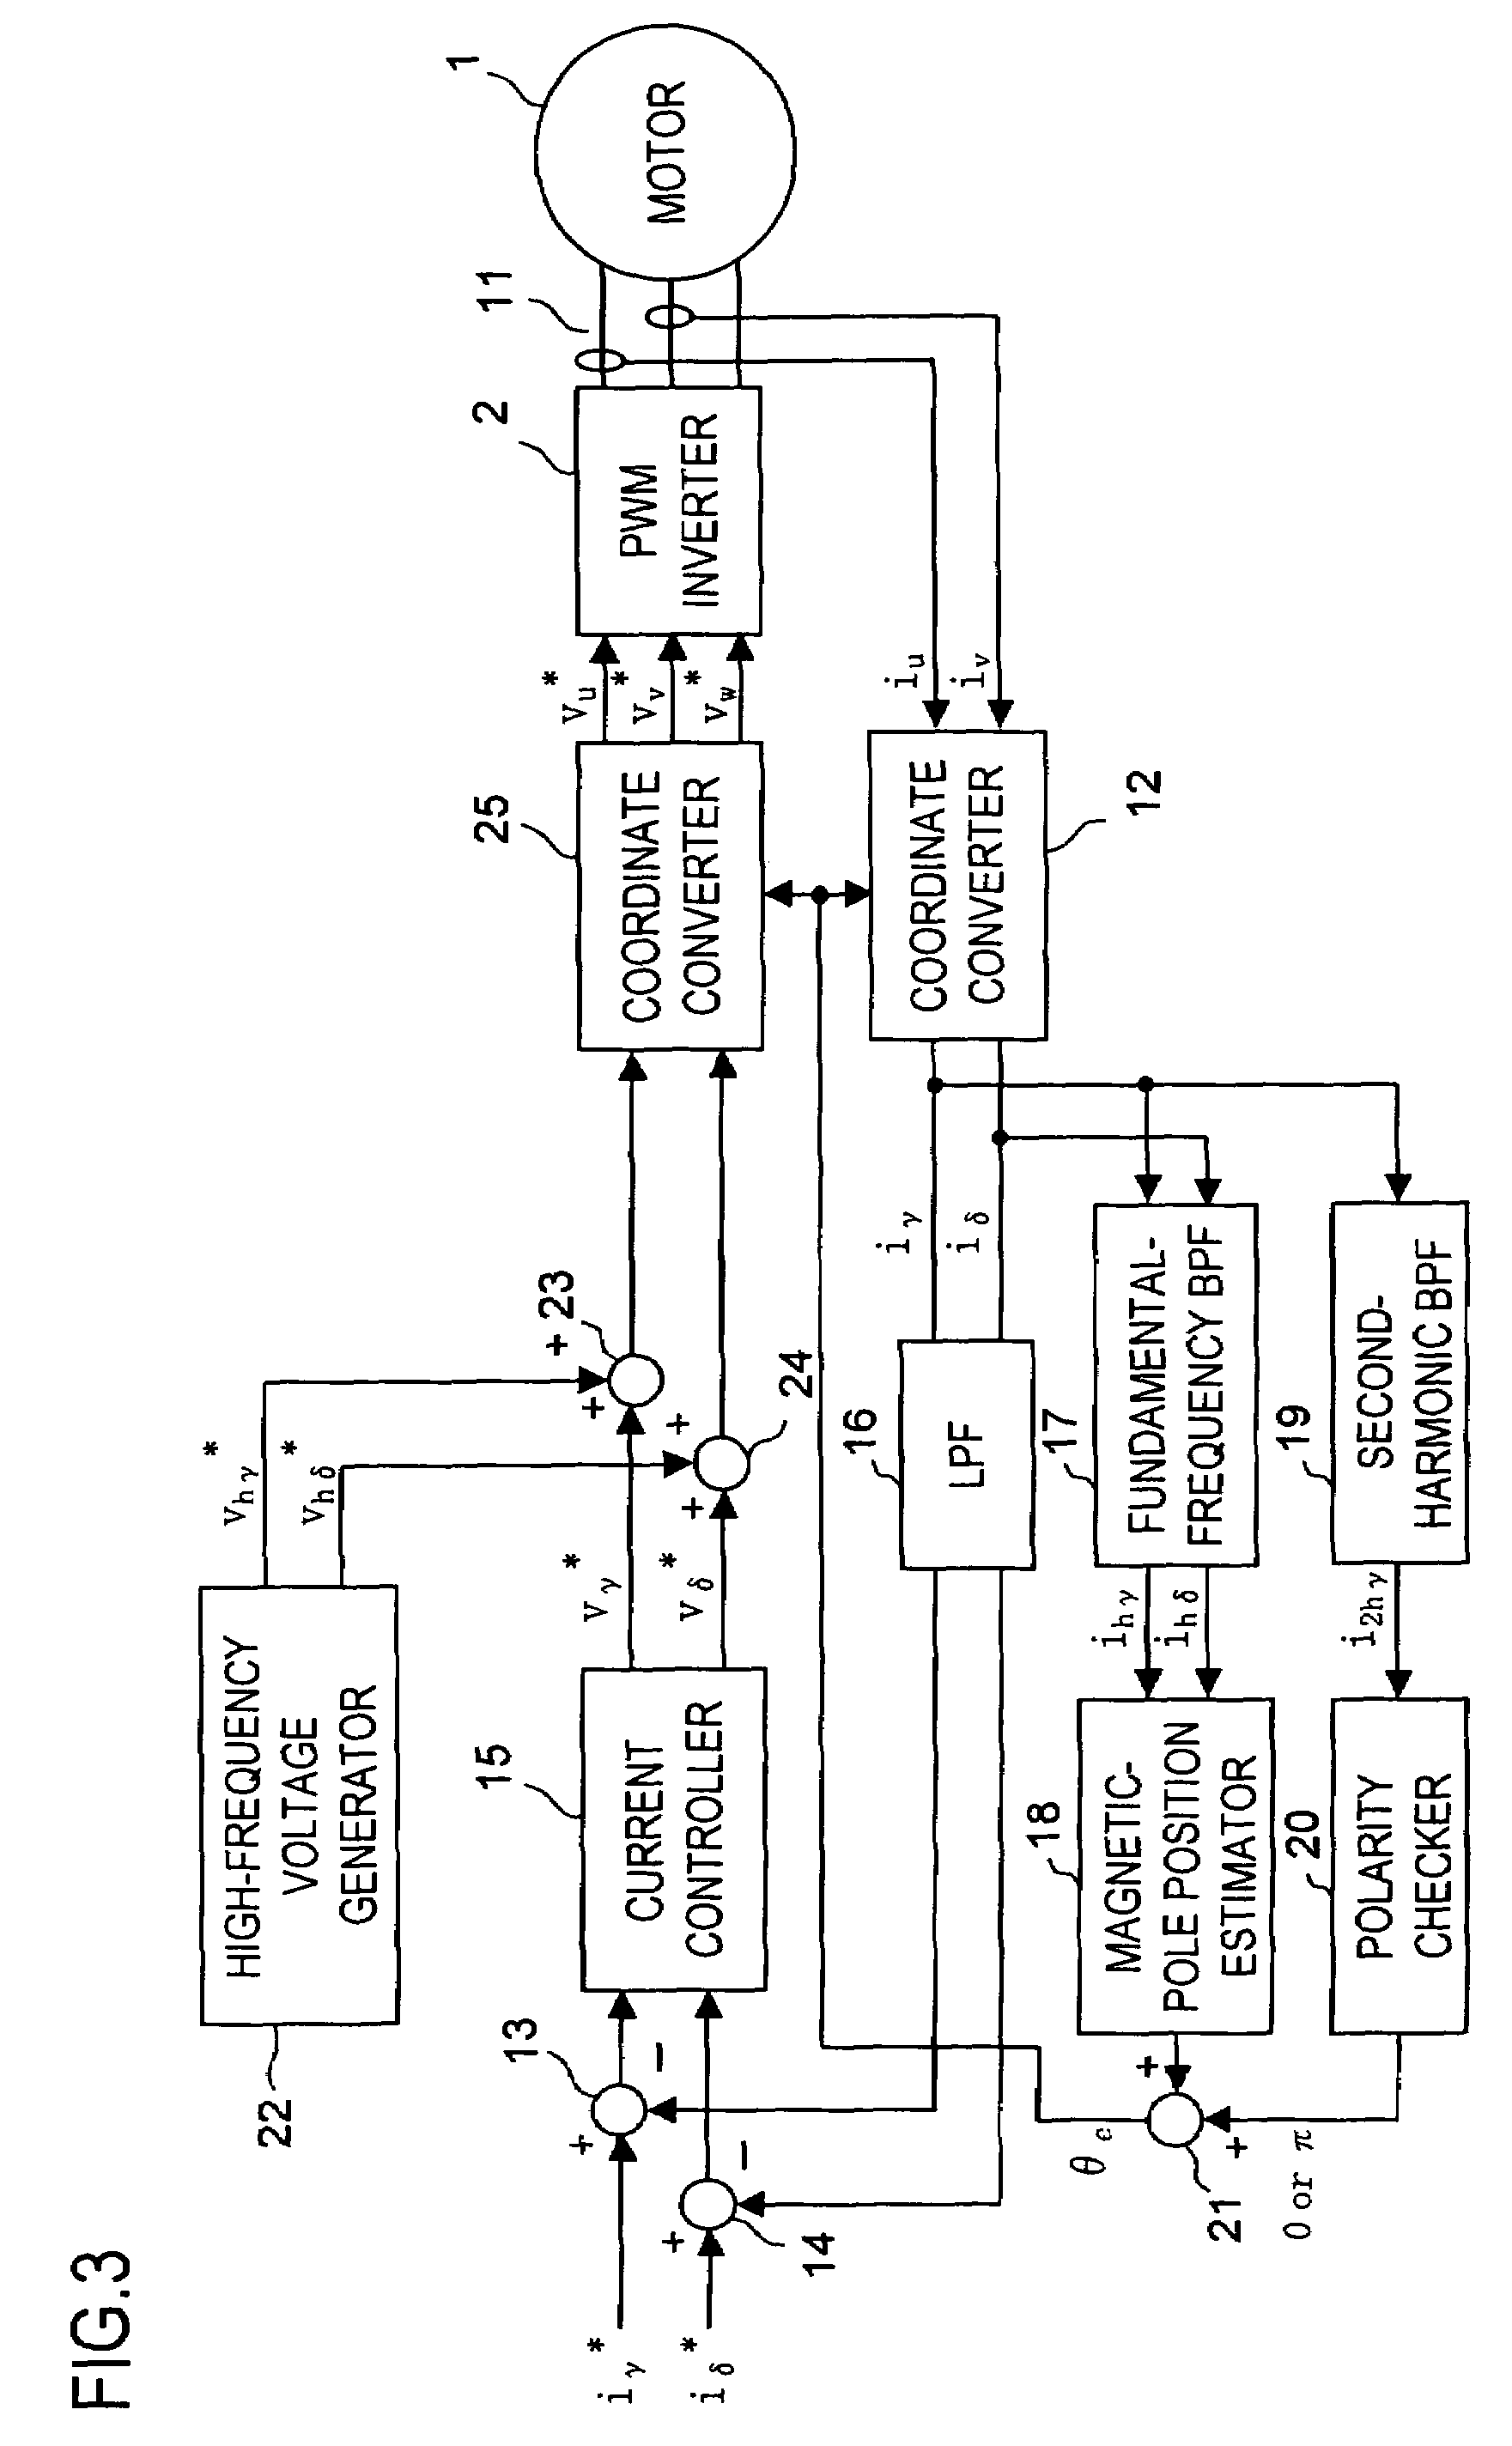 Motor driving control device